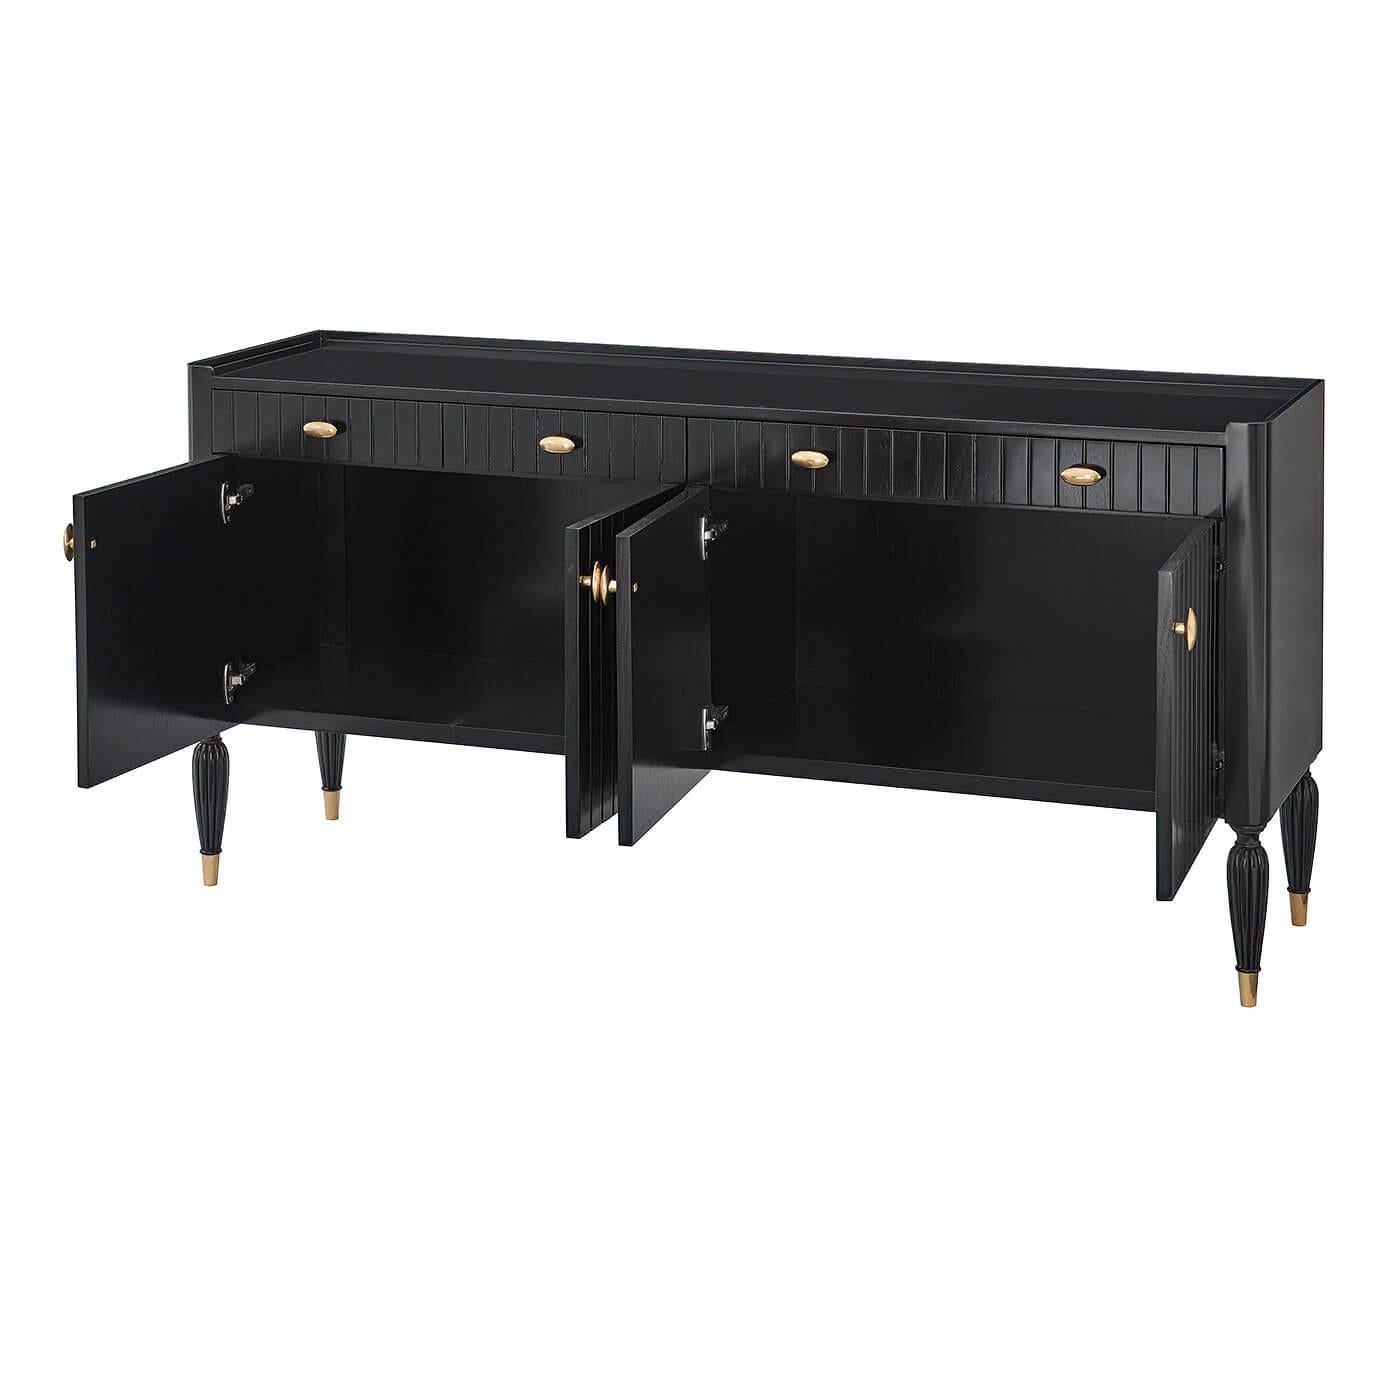 An Art Deco sideboard buffet. Channeled paneled design conceived with four drawers and doors, detailed with oval brass finished handles. The sideboard top is ready to serve with a three-quarter gallery. Lobed reeded tapered legs with brass